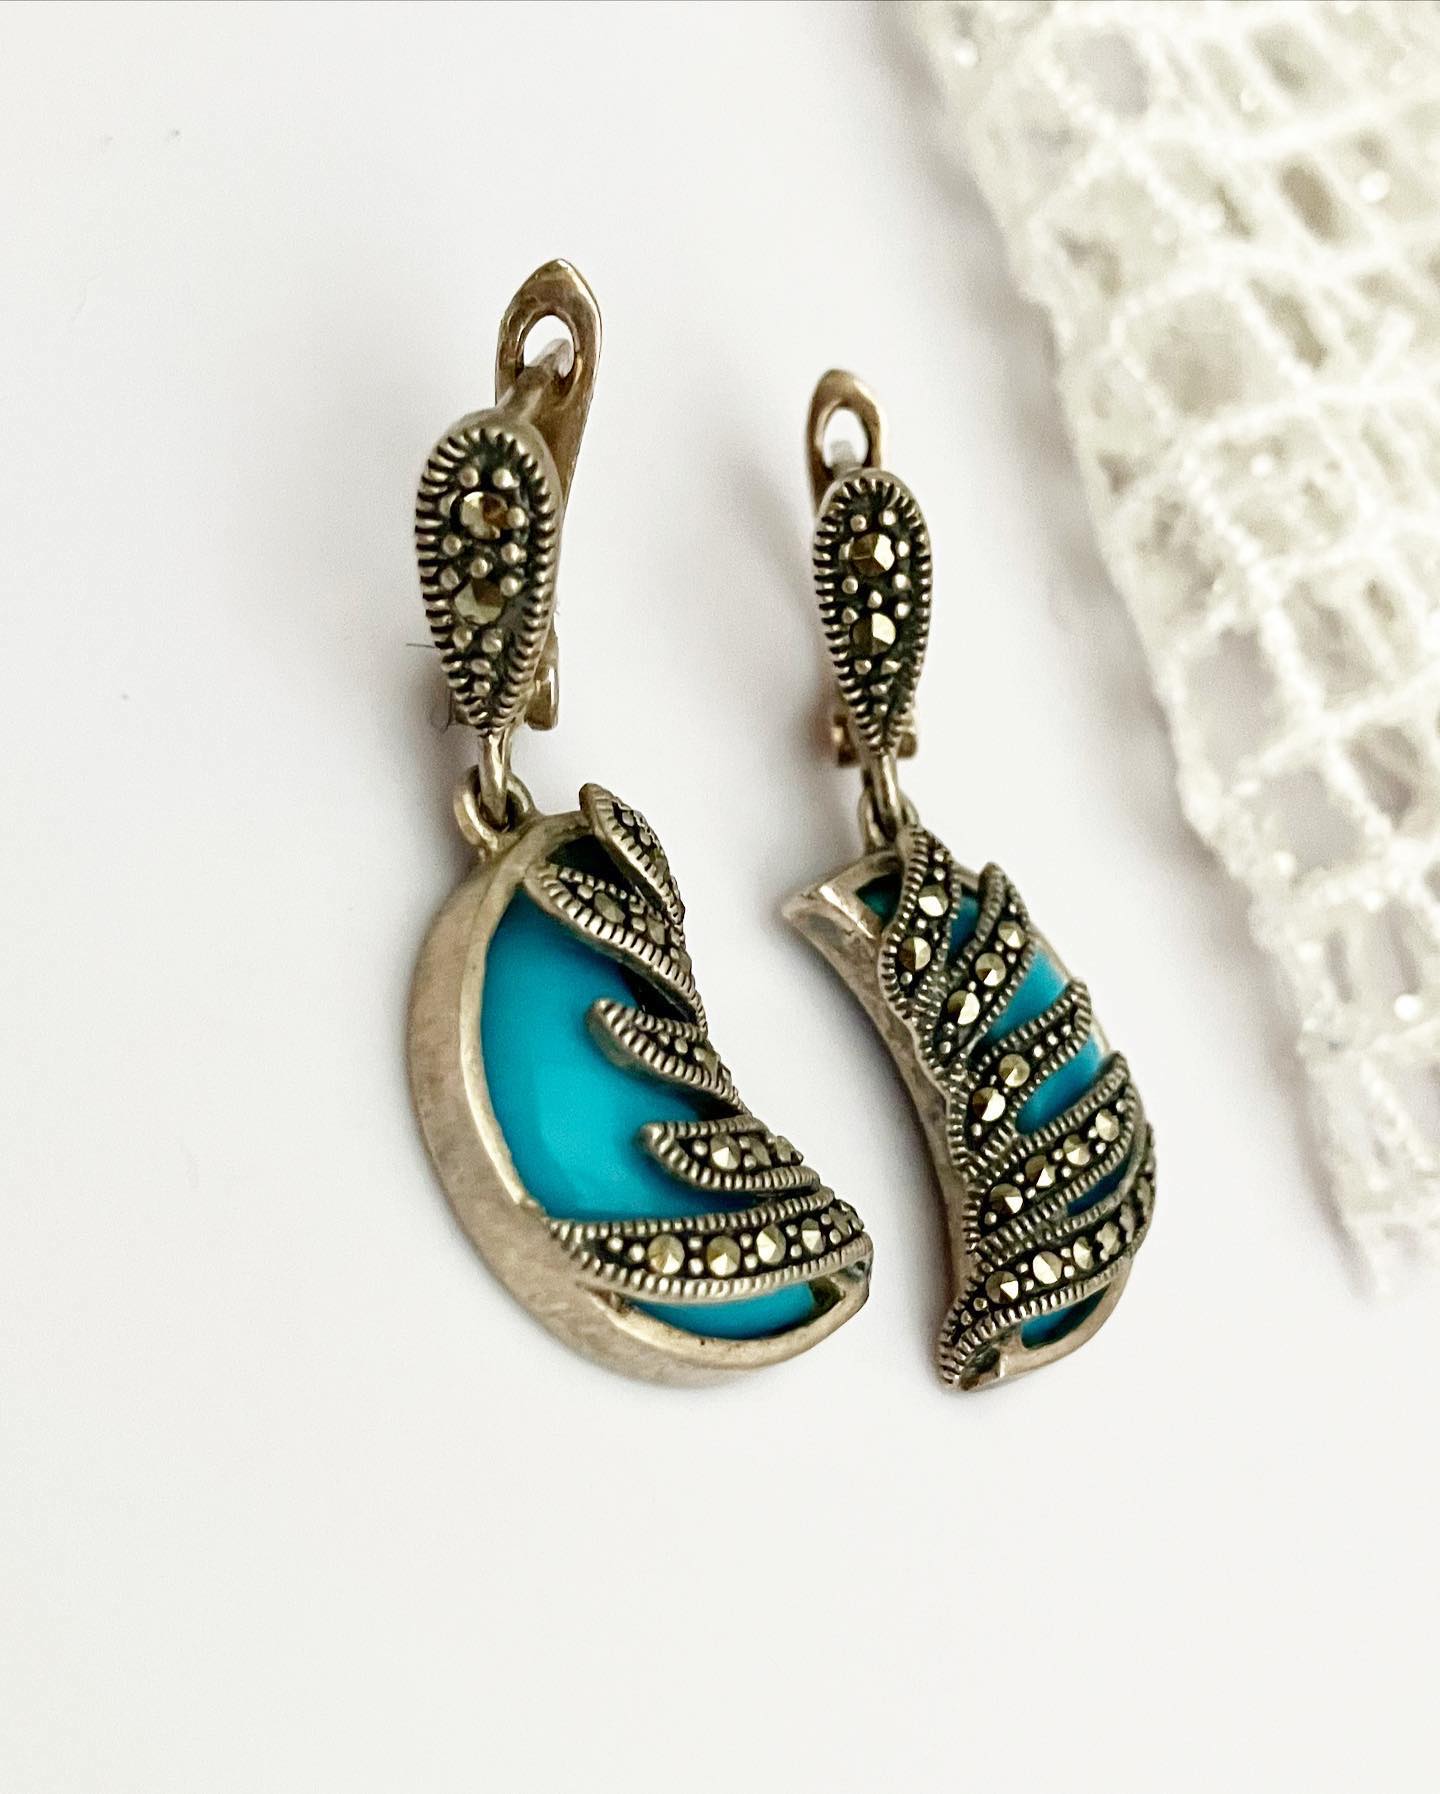 Earrings silver 925 samples with turquoise "Heavenly turquoise"